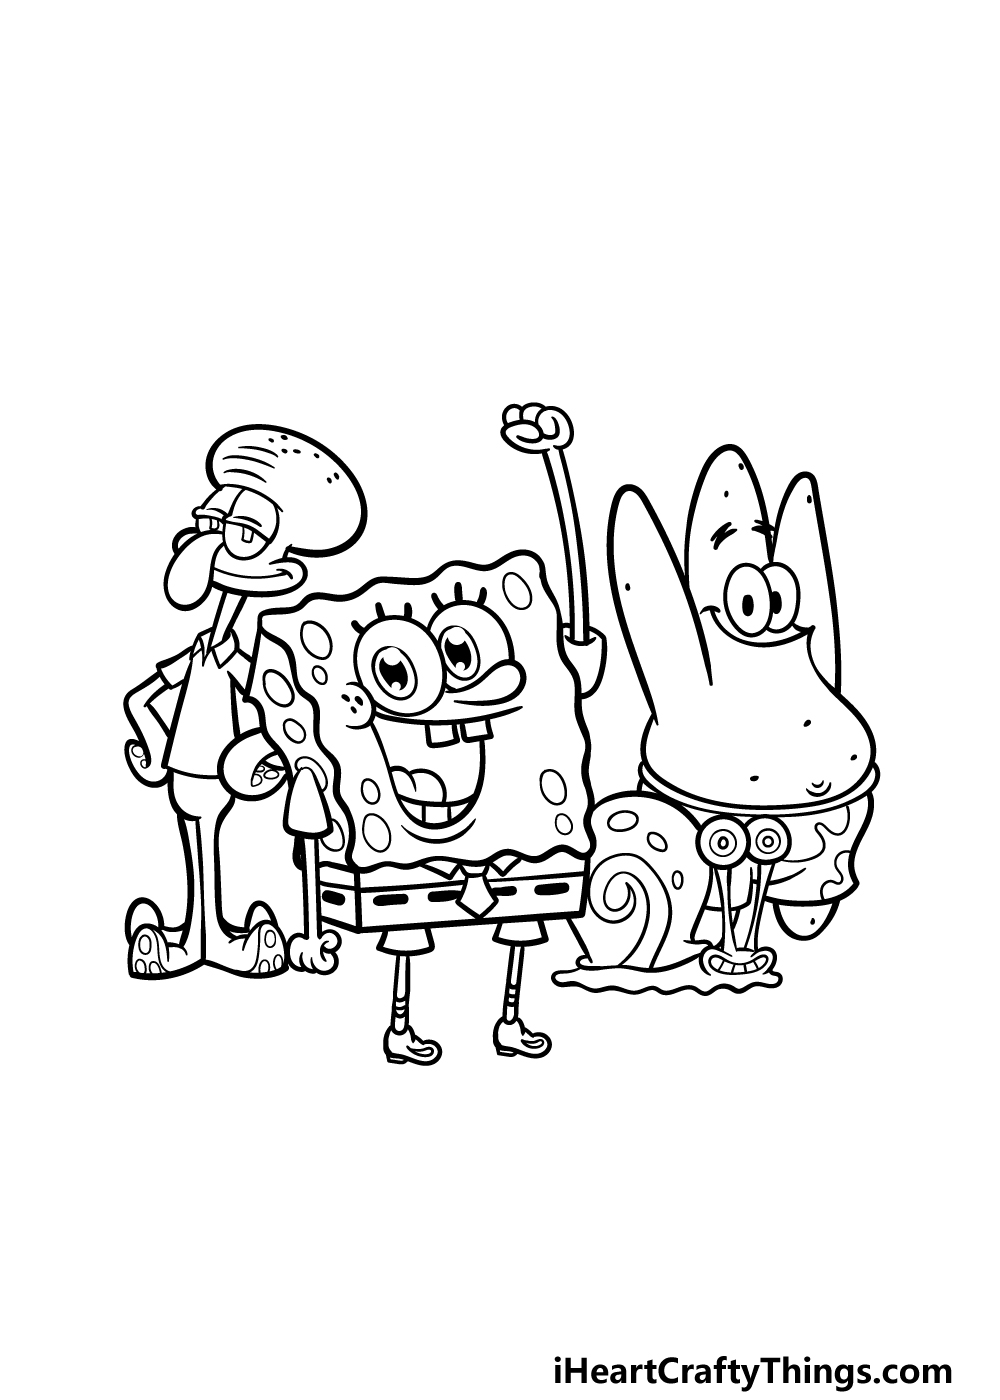 Spongebob Characters Drawing - How To Draw Spongebob Characters Step By Step